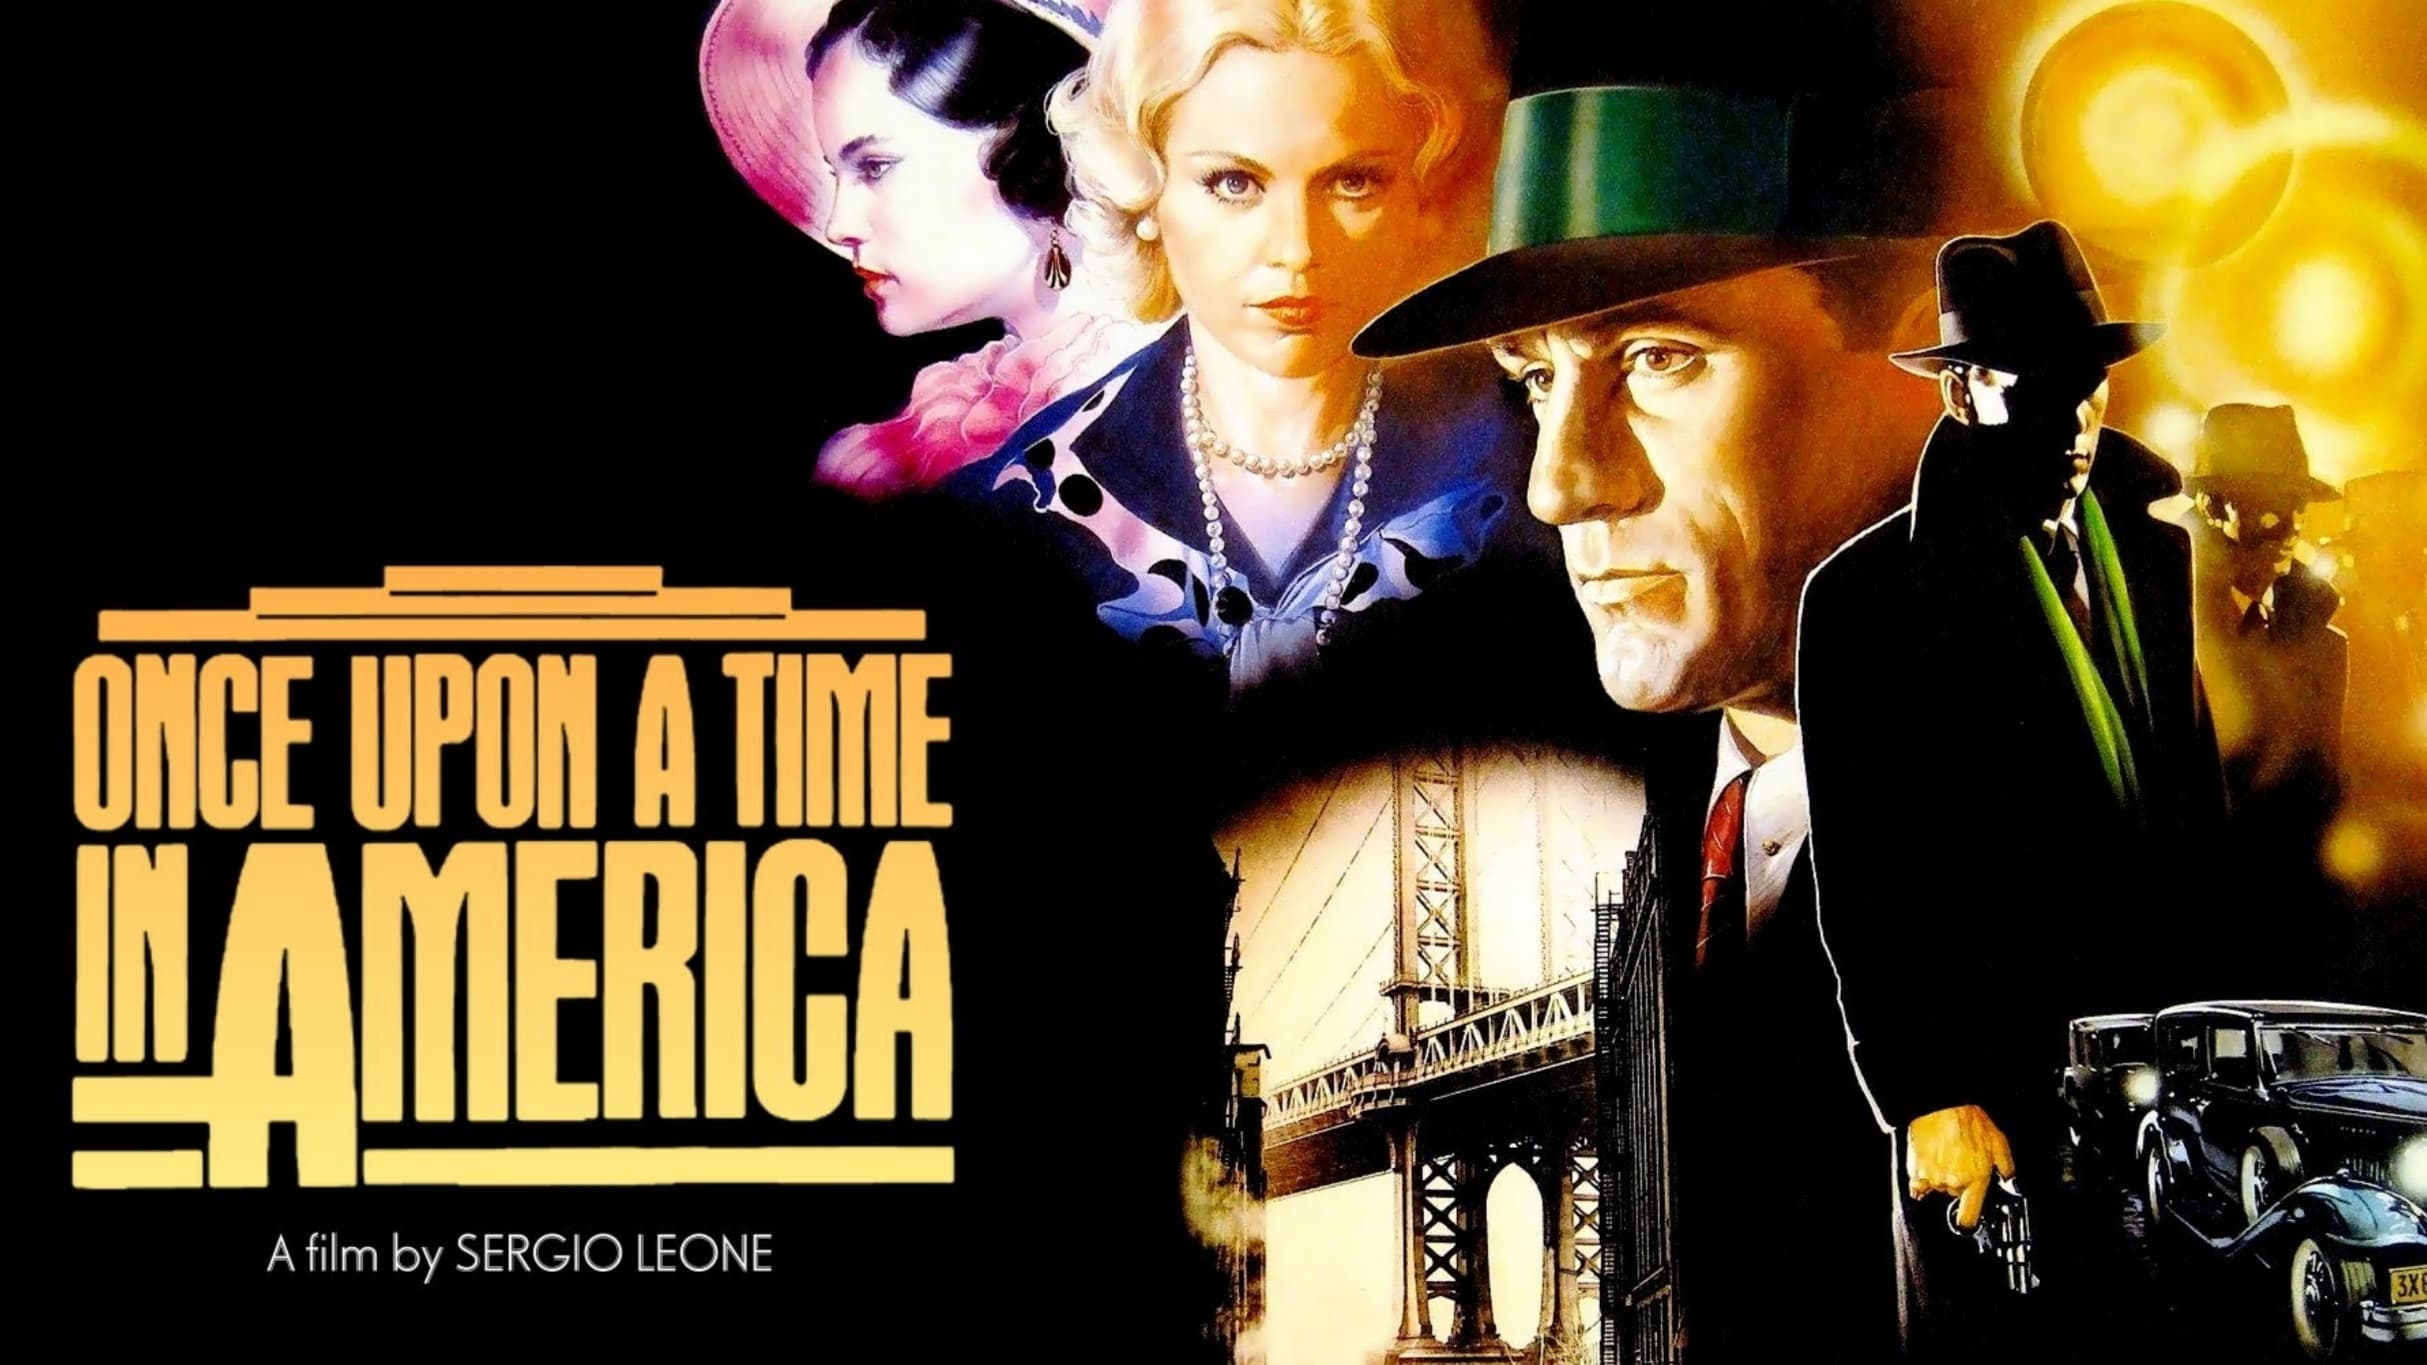 Once Upon a Time in America - suuri gangsterisota (1984)